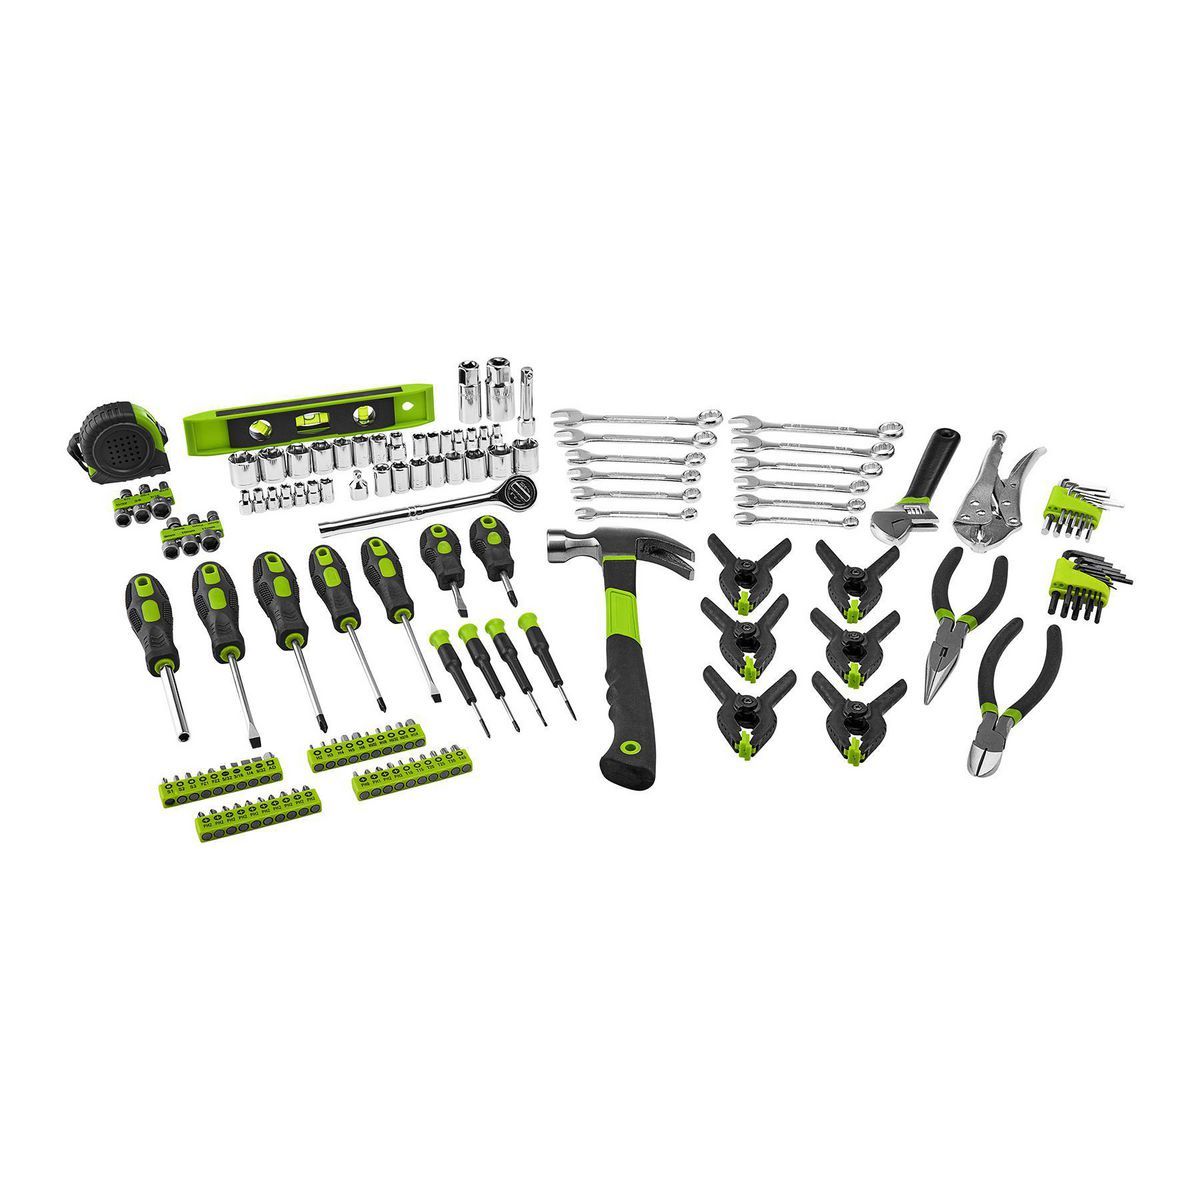 Tool Set With Case, 146 Pc.